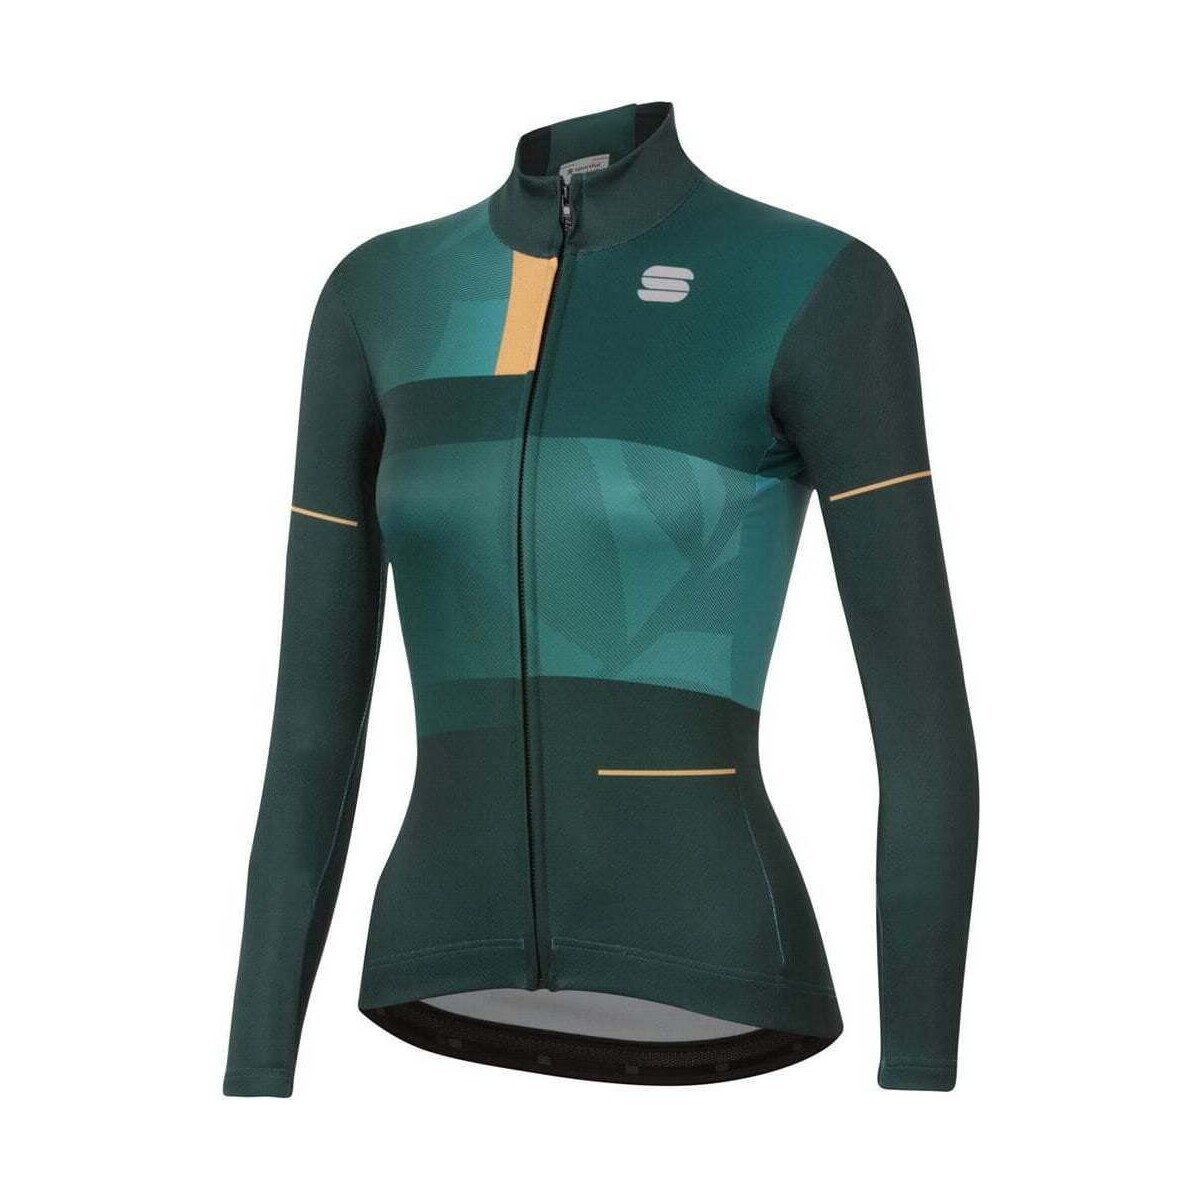 textil Mujer Camisas Sportful OASIS W THERMAL JERSEY Multicolor